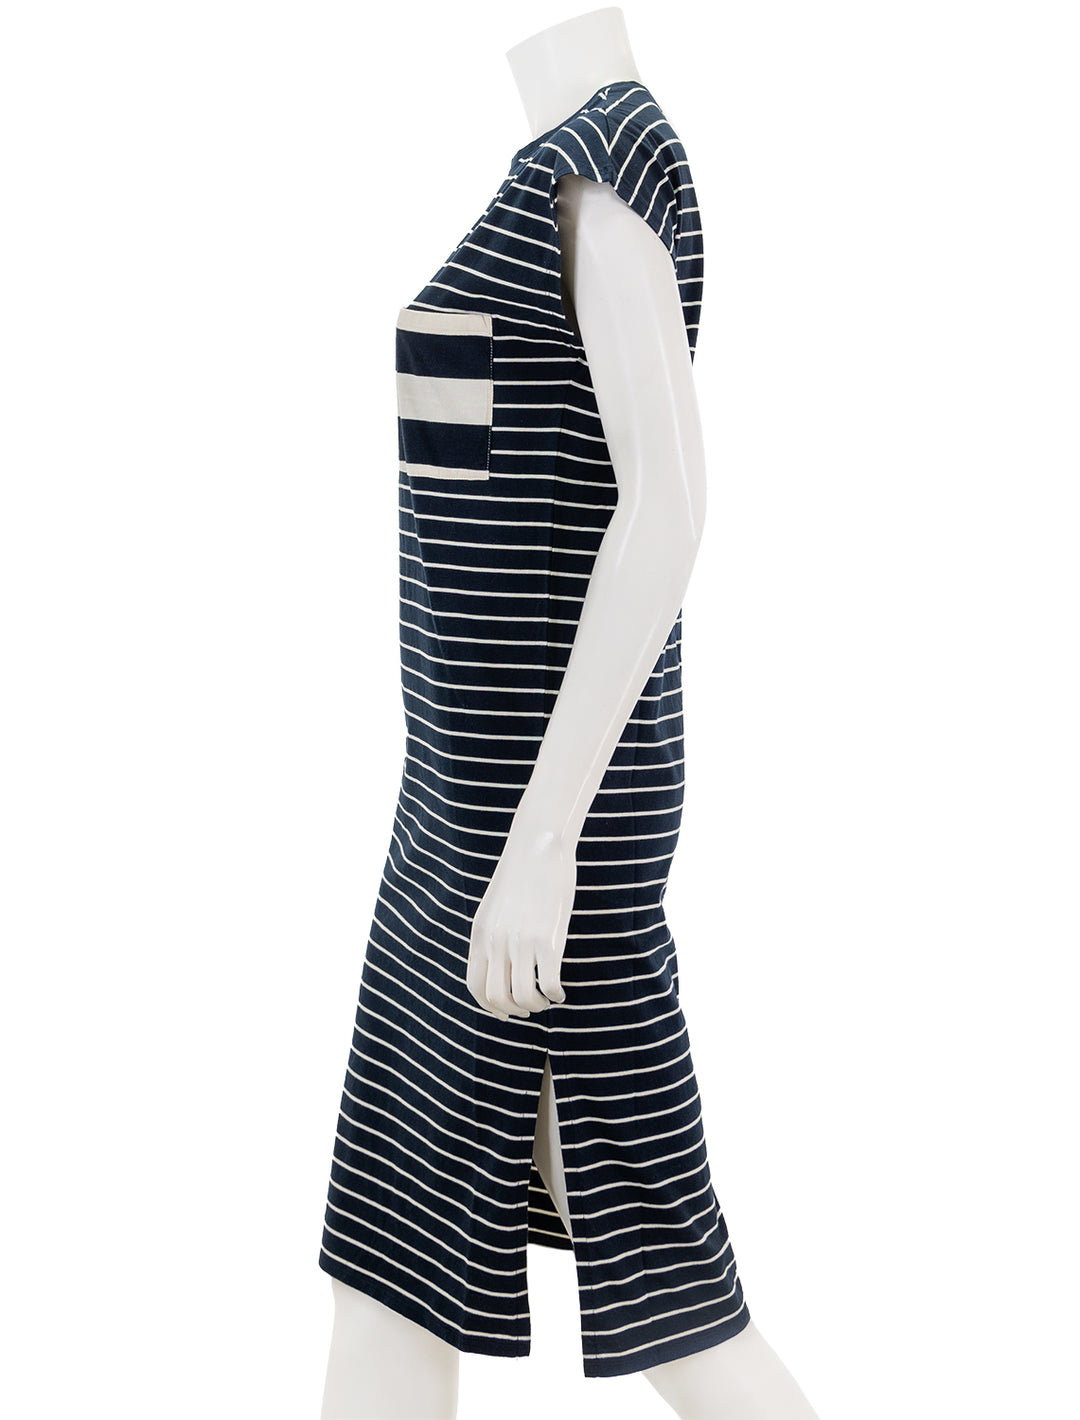 Side view of KULE's the honor dress in navy and cream stripe.